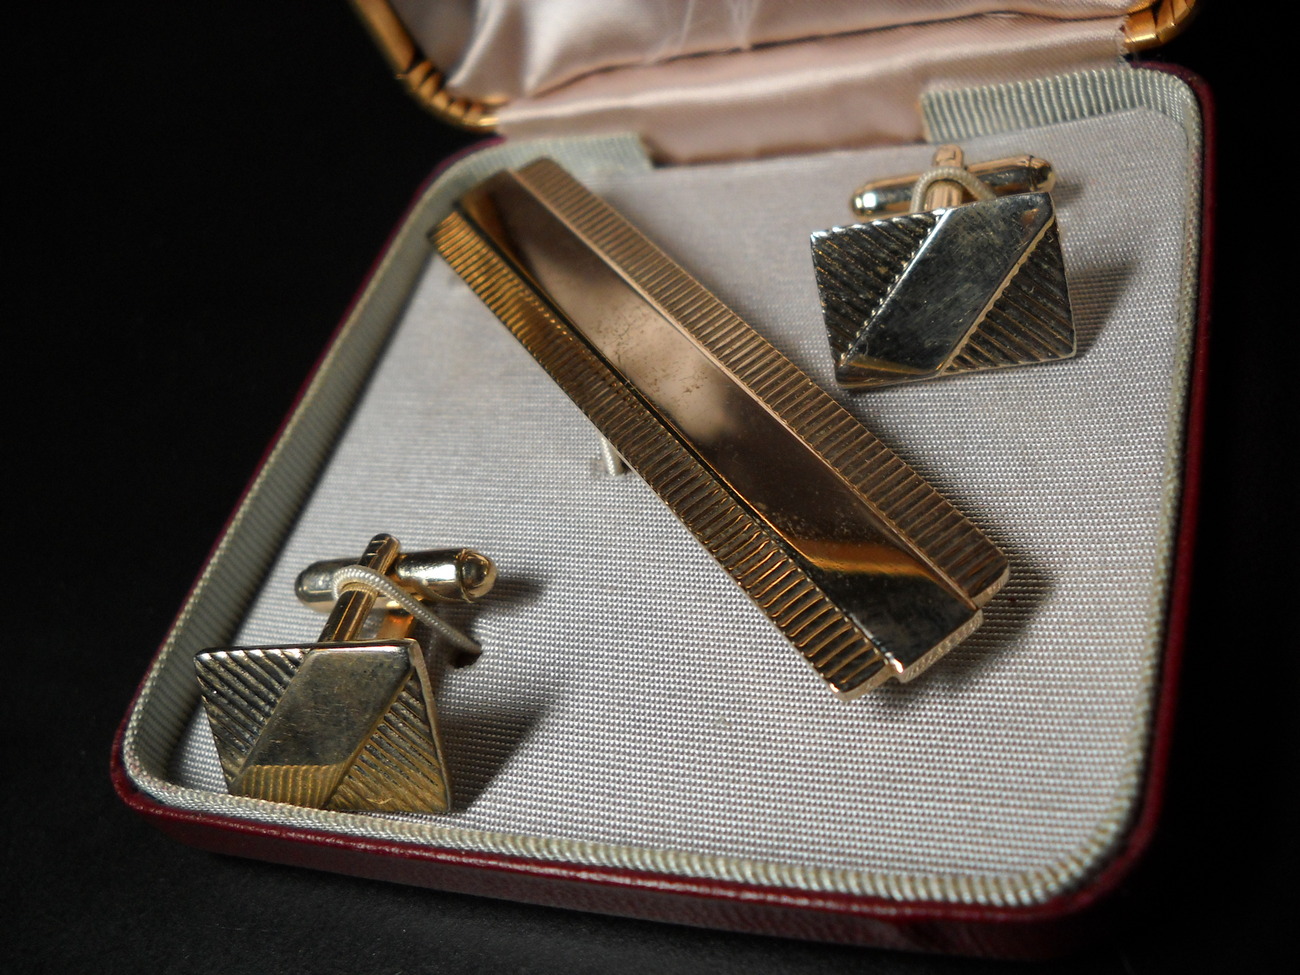 Shields Rectangular Cuff Links and Tie Bar Shields Fifth Ave ...